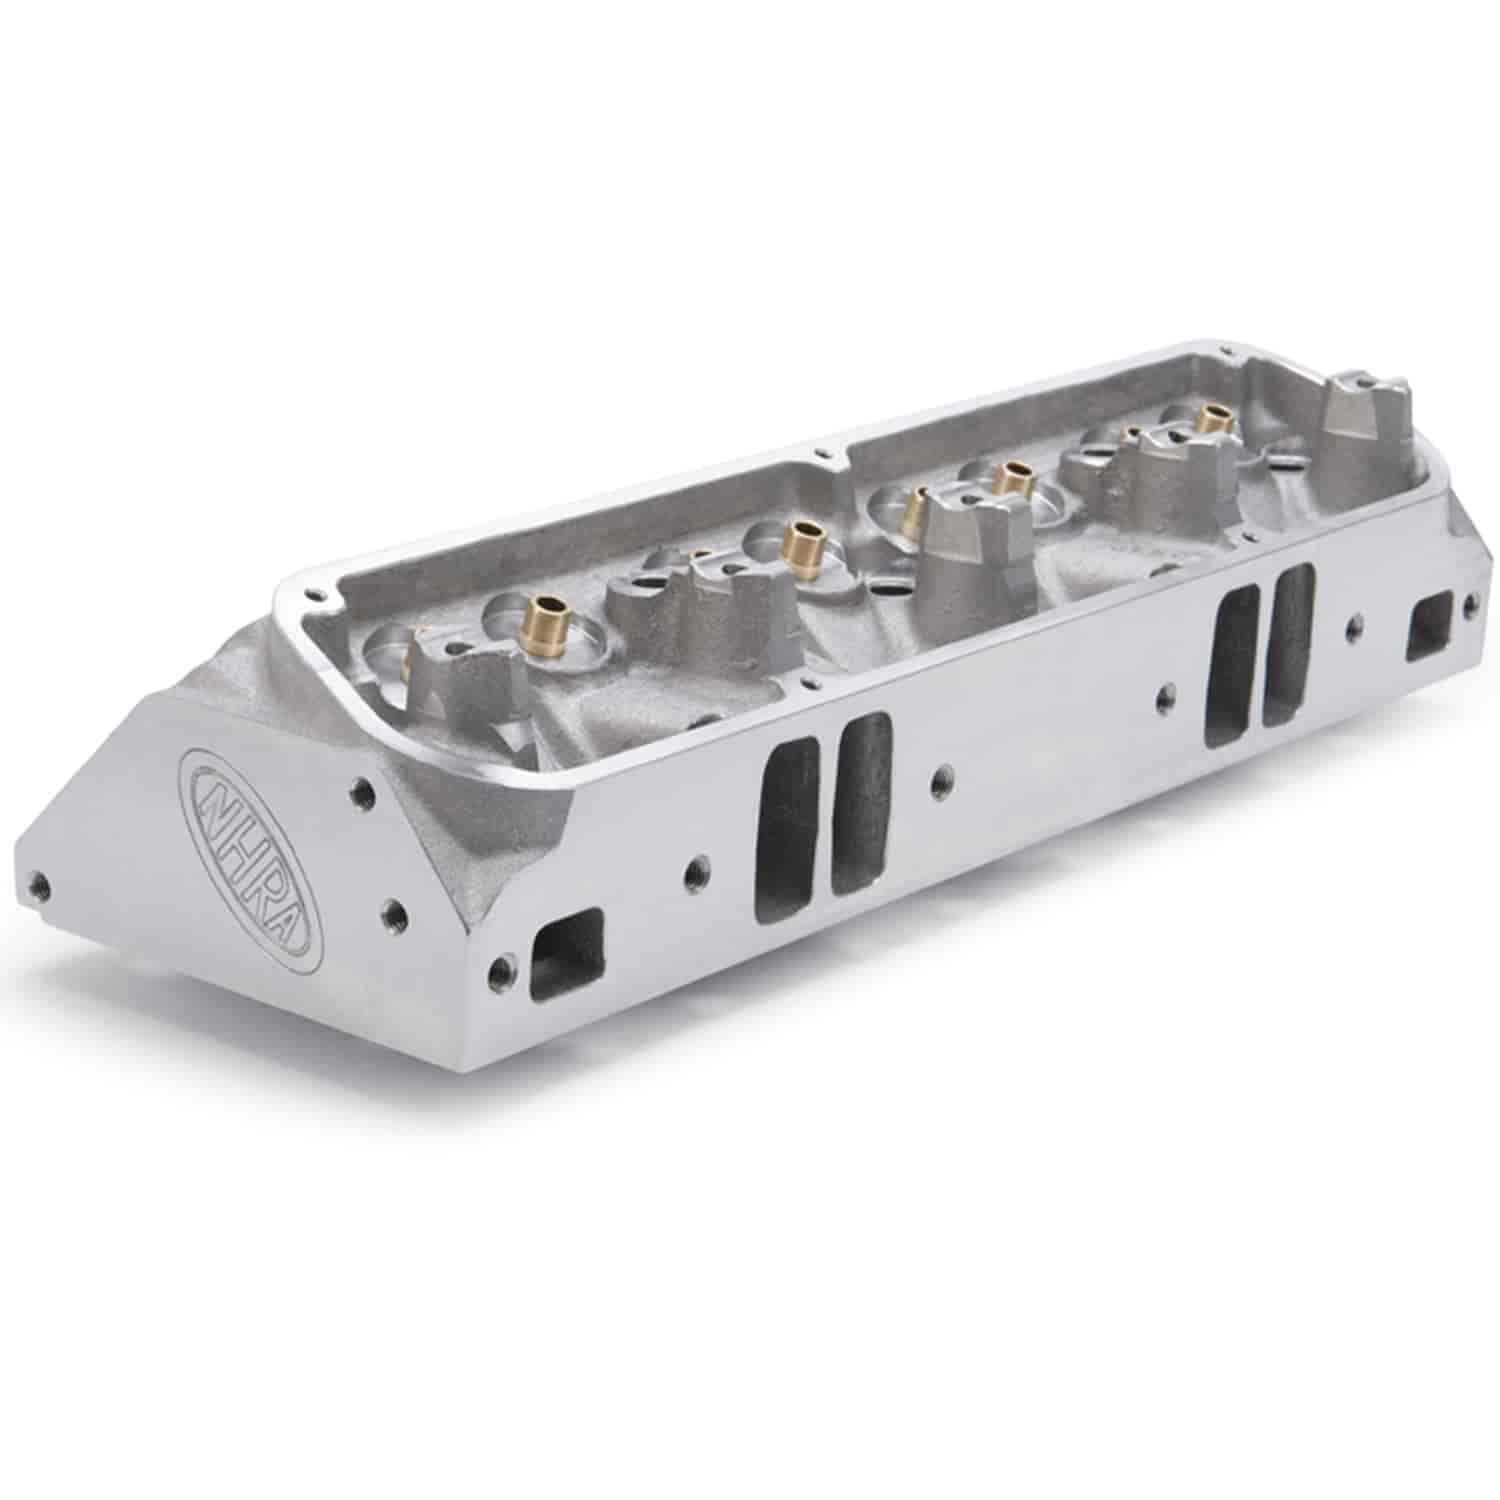 NHRA Performer RPM Cylinder head for Small Block Chryler